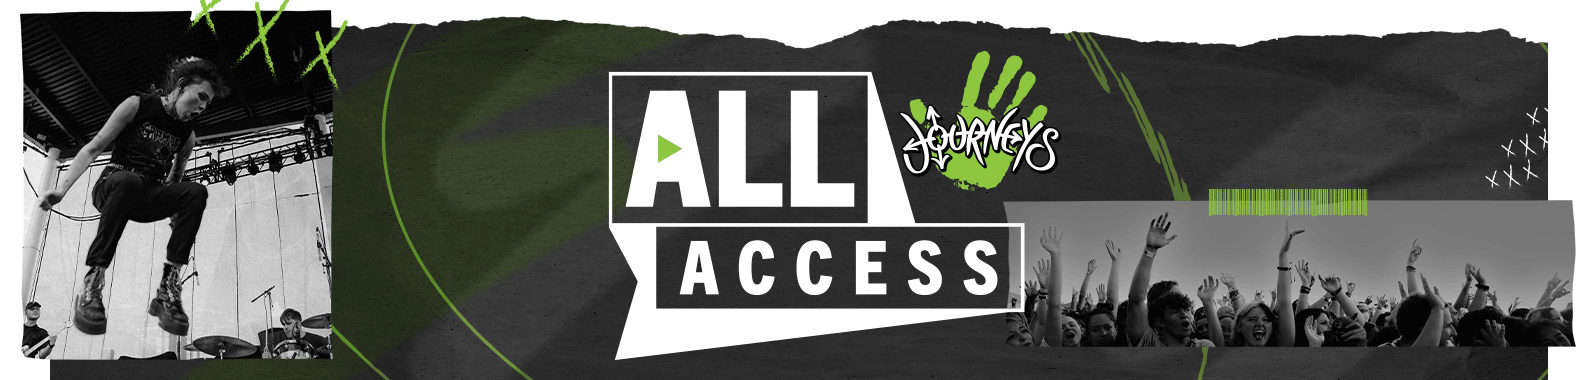 Journeys All Access